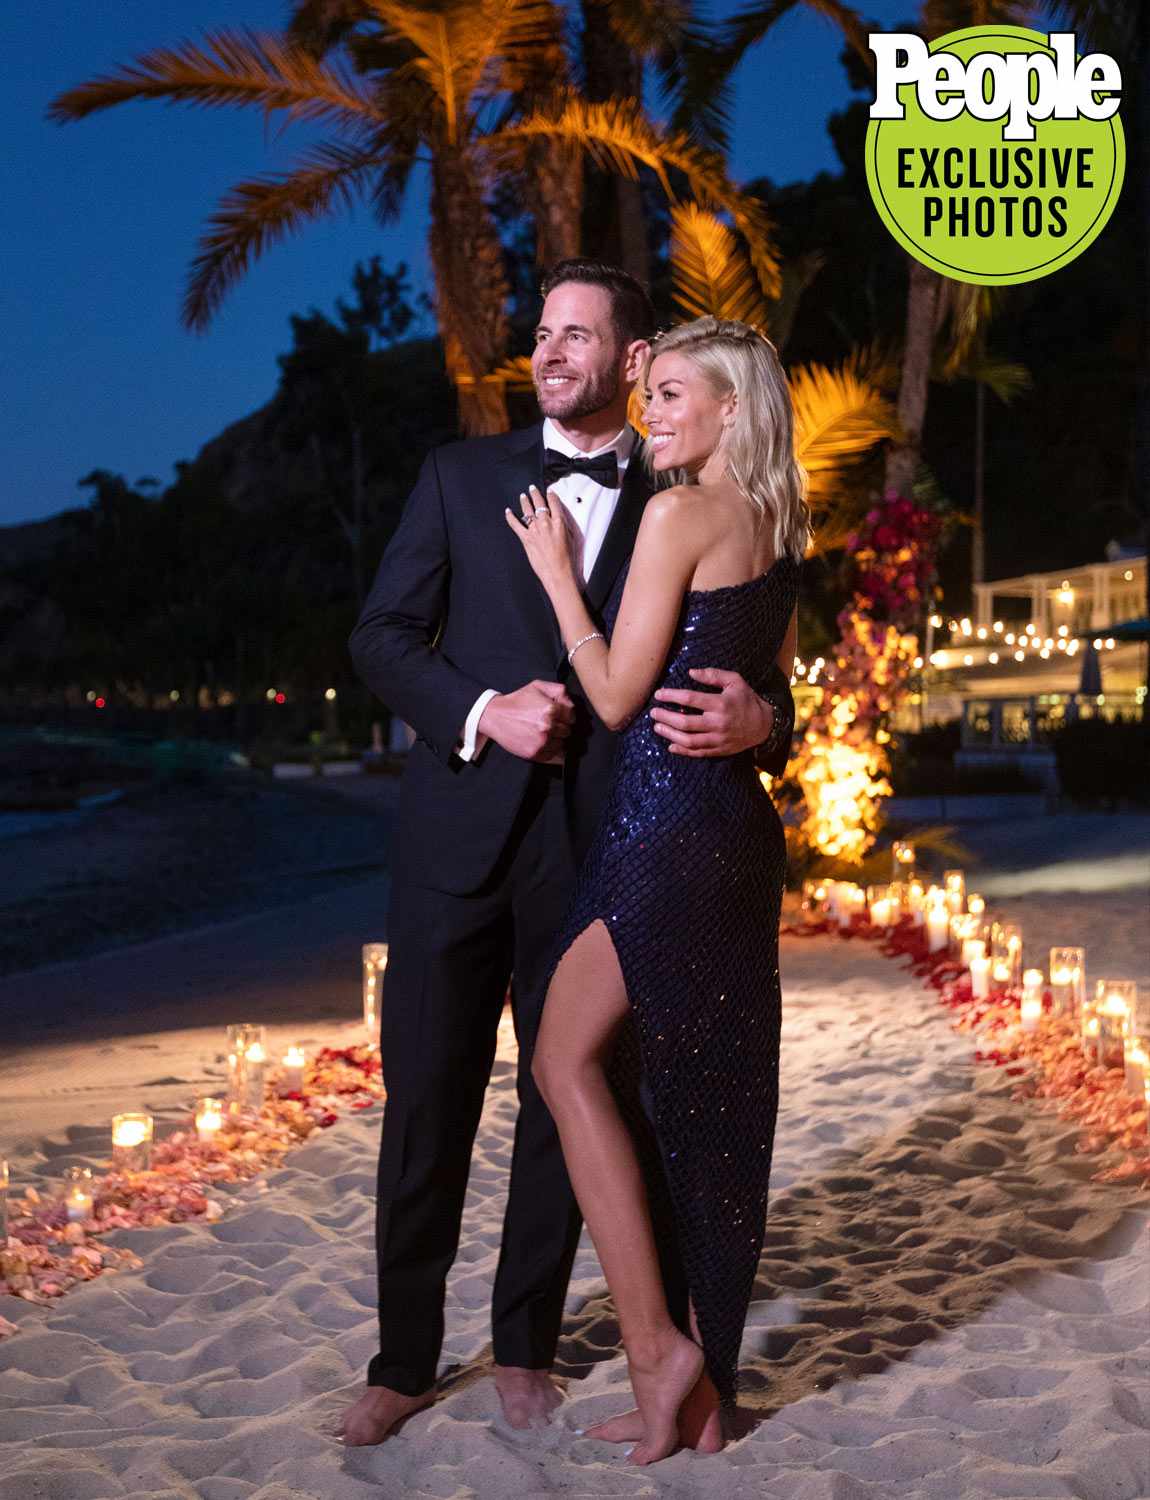 Tarek El Moussa and Heather Rae Young Engagement